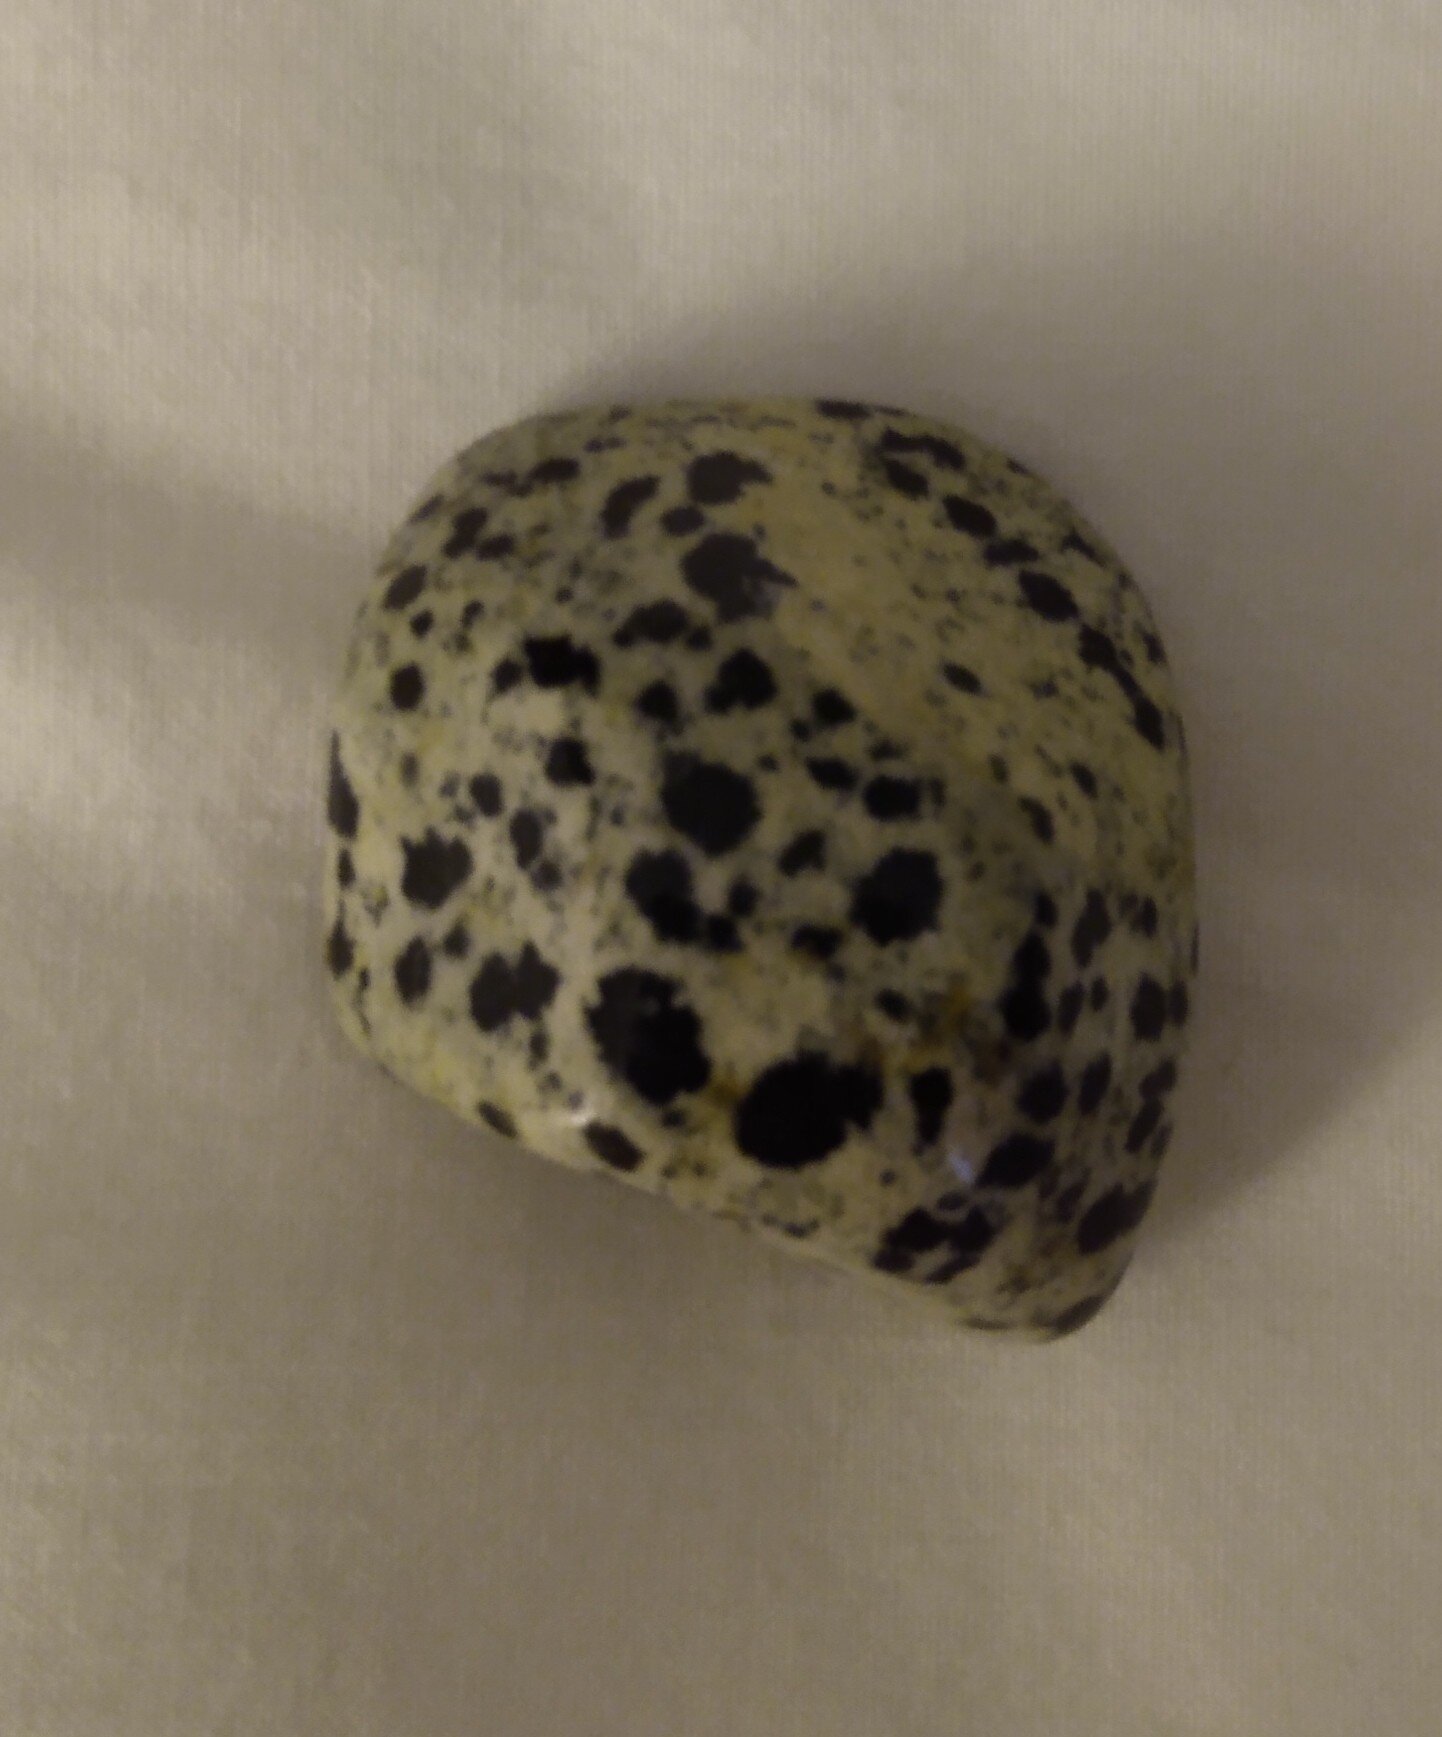 One of my favorite stones! The Dalmatian Stone encourages a sense of playfulness and encourages self-confidence. It’s good for grounding. I keep this stone on my bedside table. Photo by author.